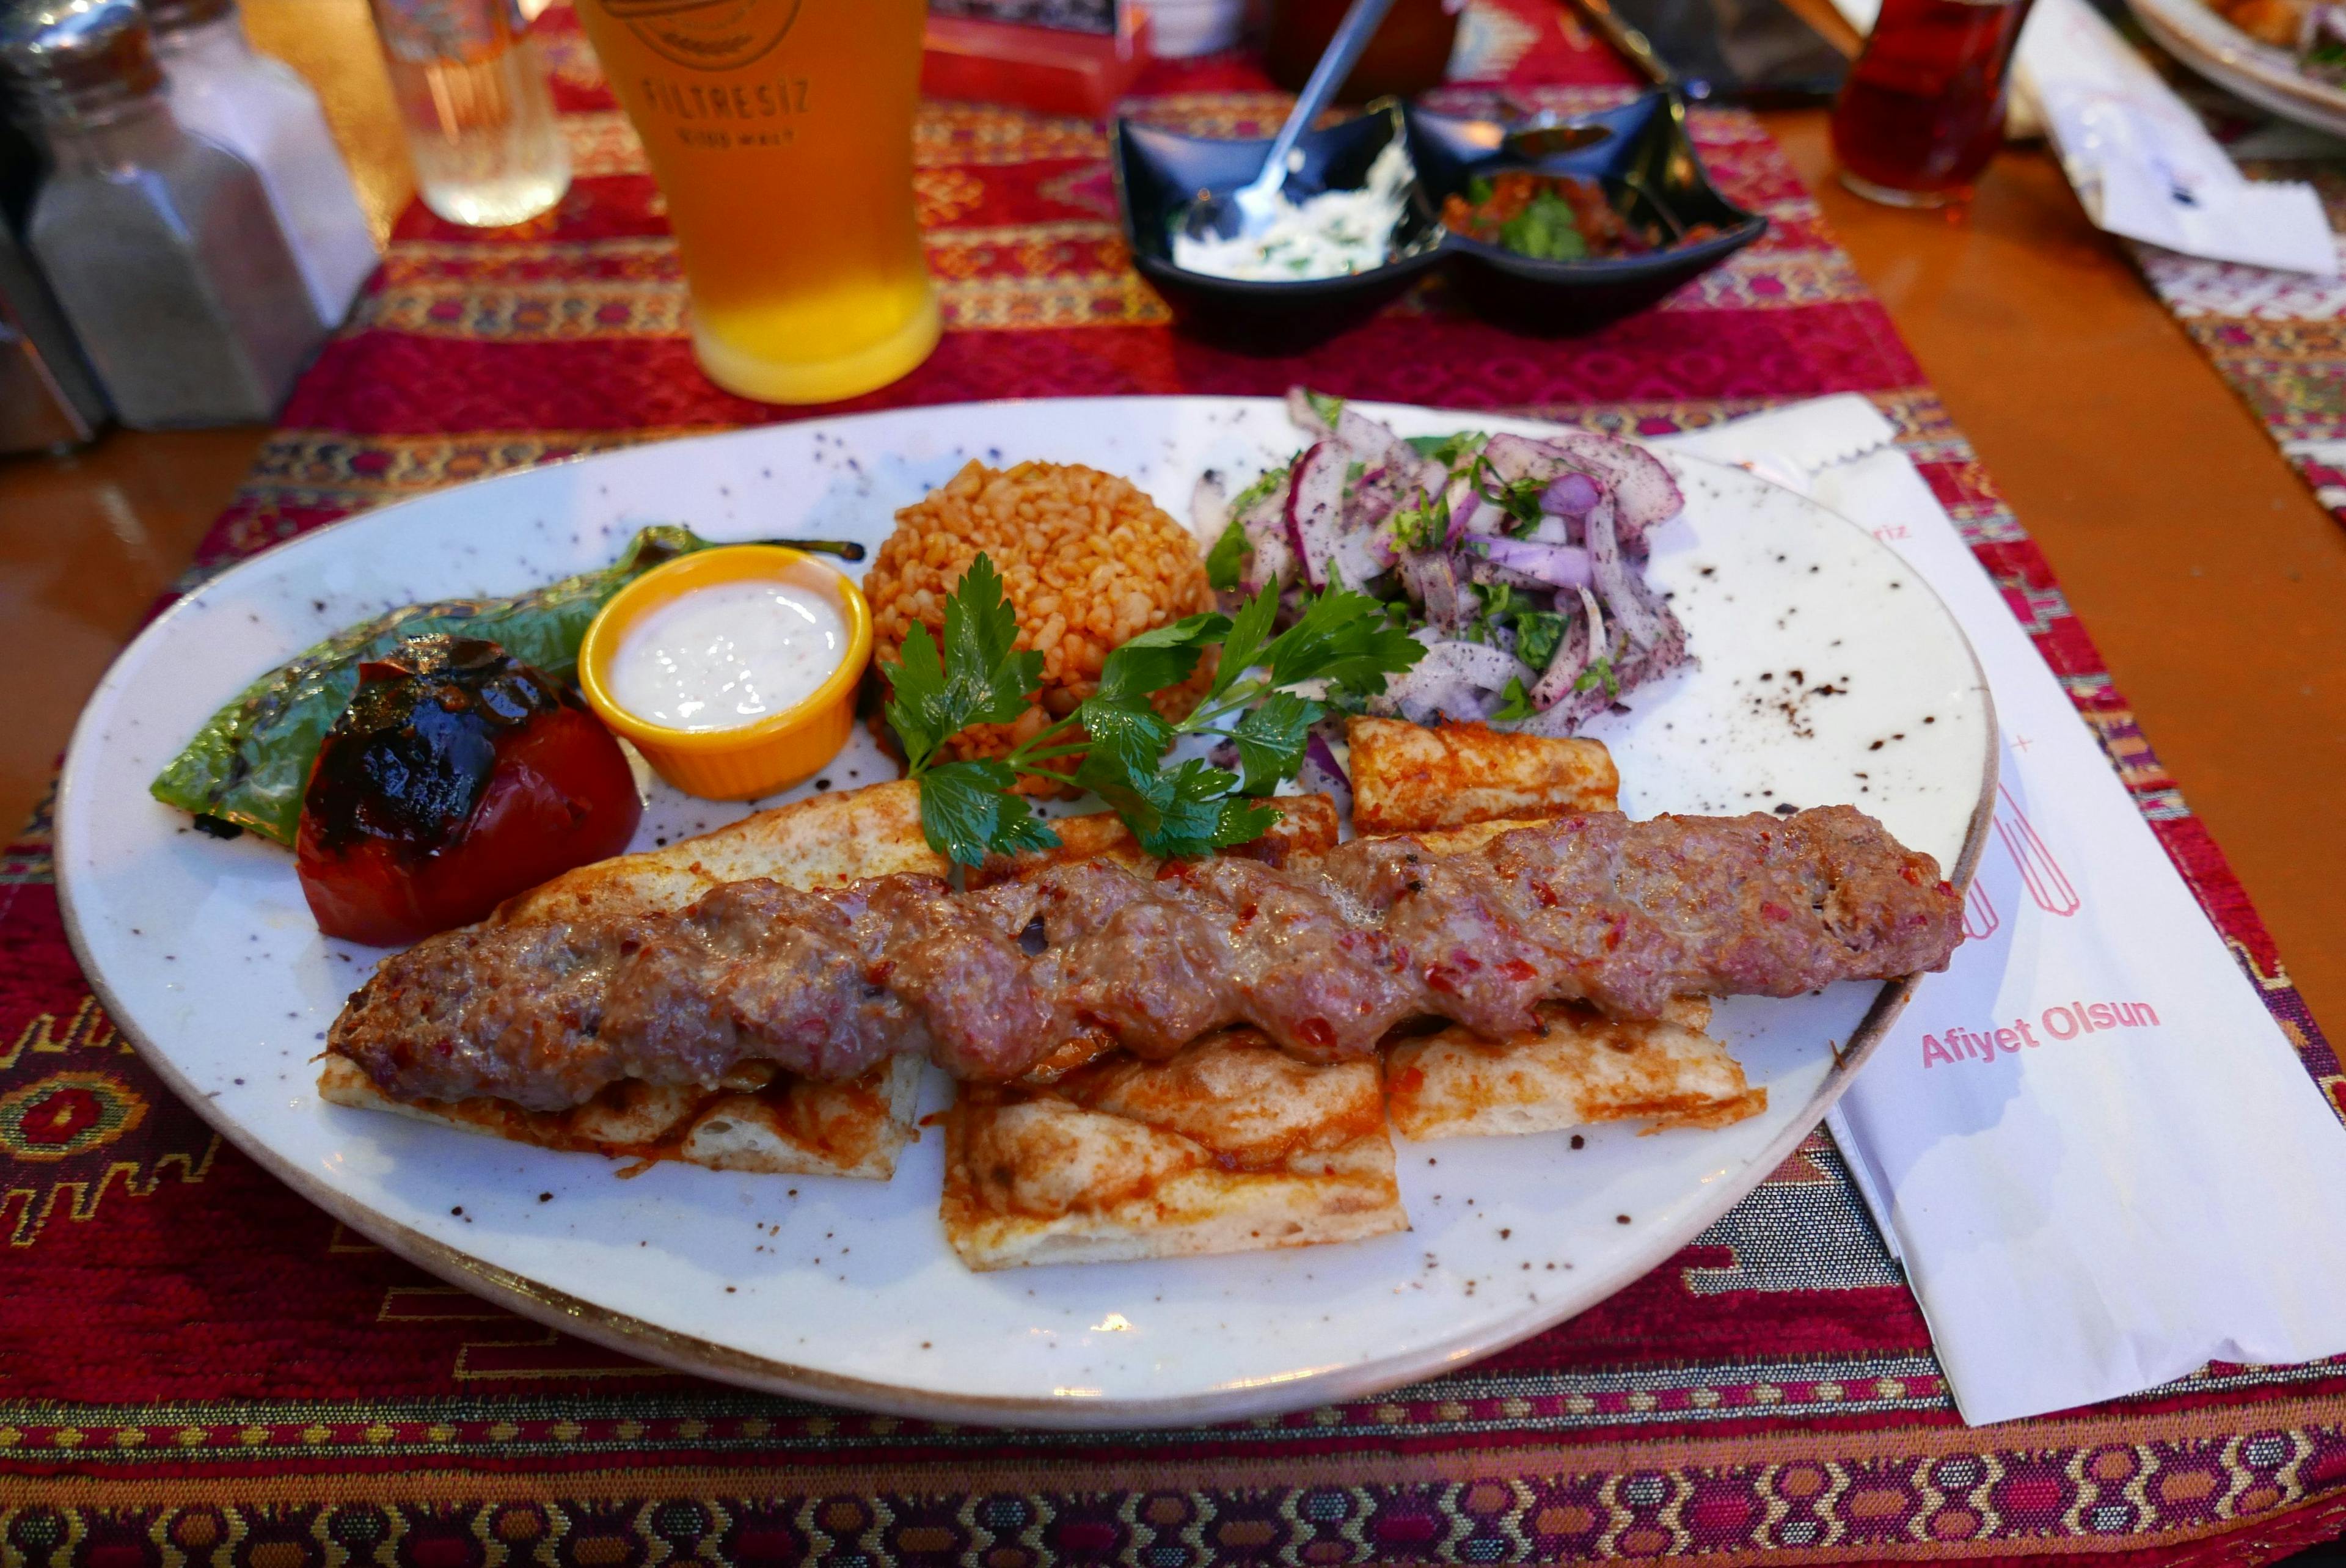 Turkish kebab meal on the plate in Istanbul